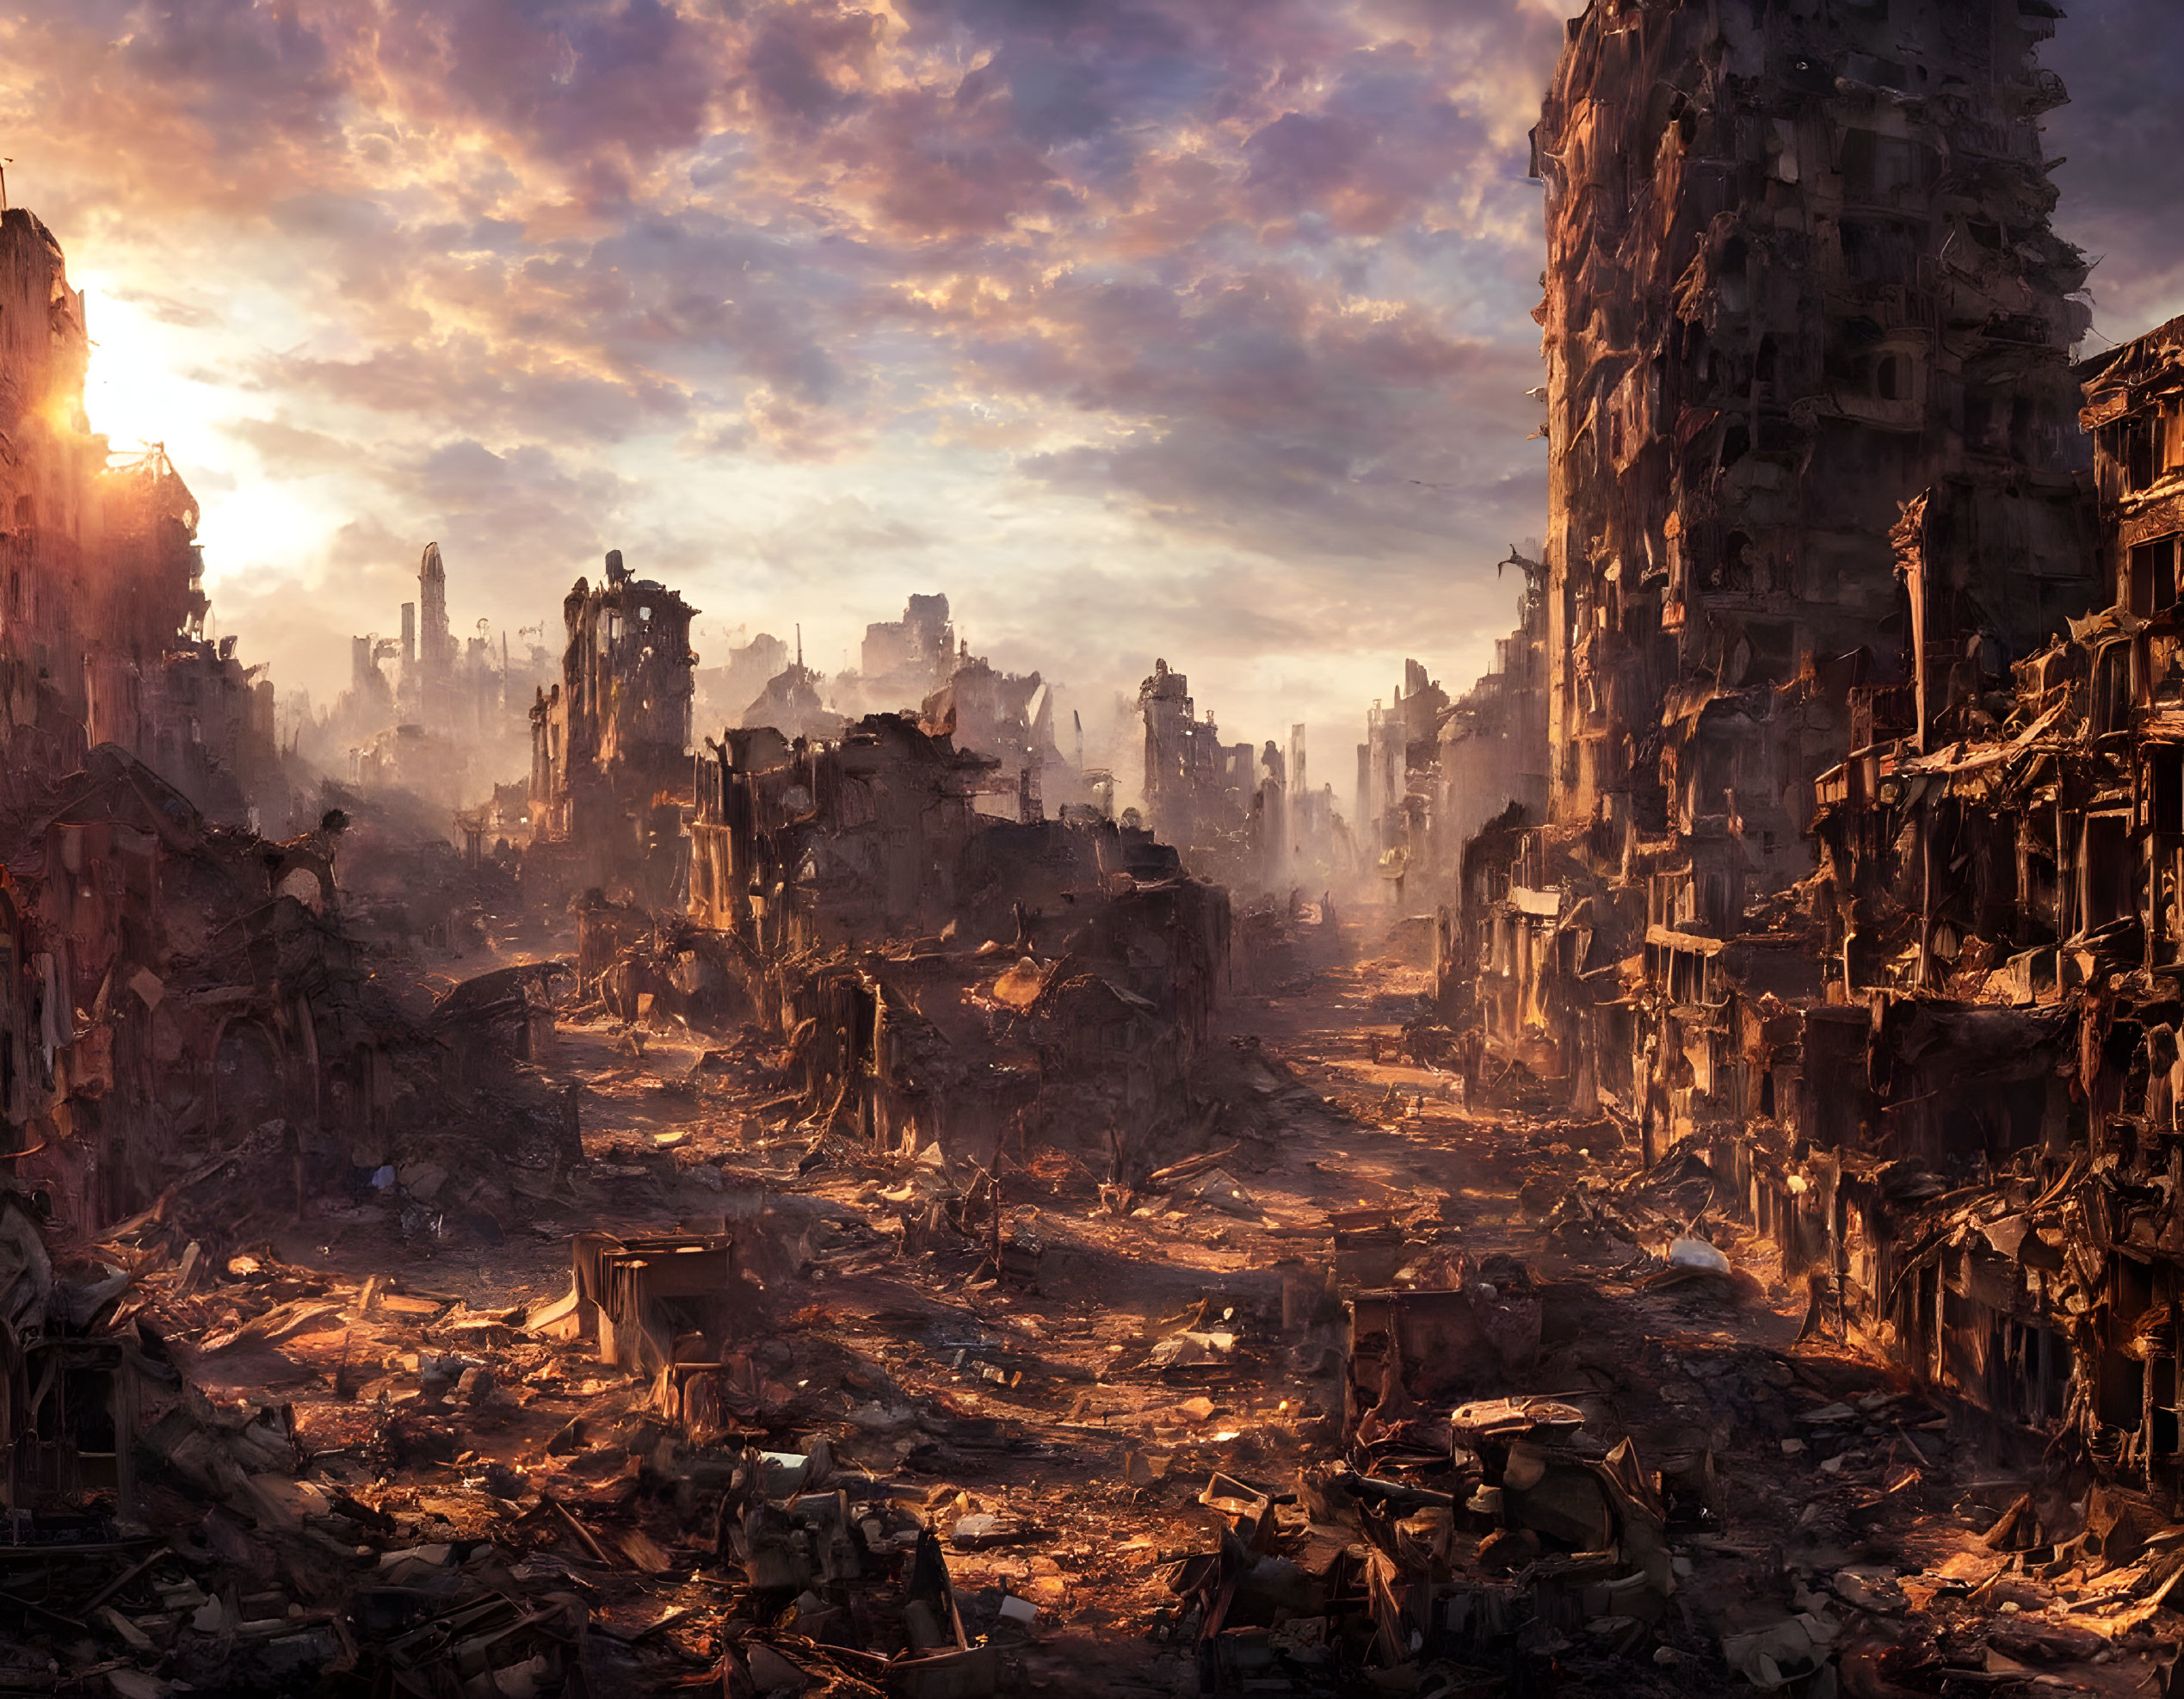 Sunset over post-apocalyptic city ruins and debris in orange sky